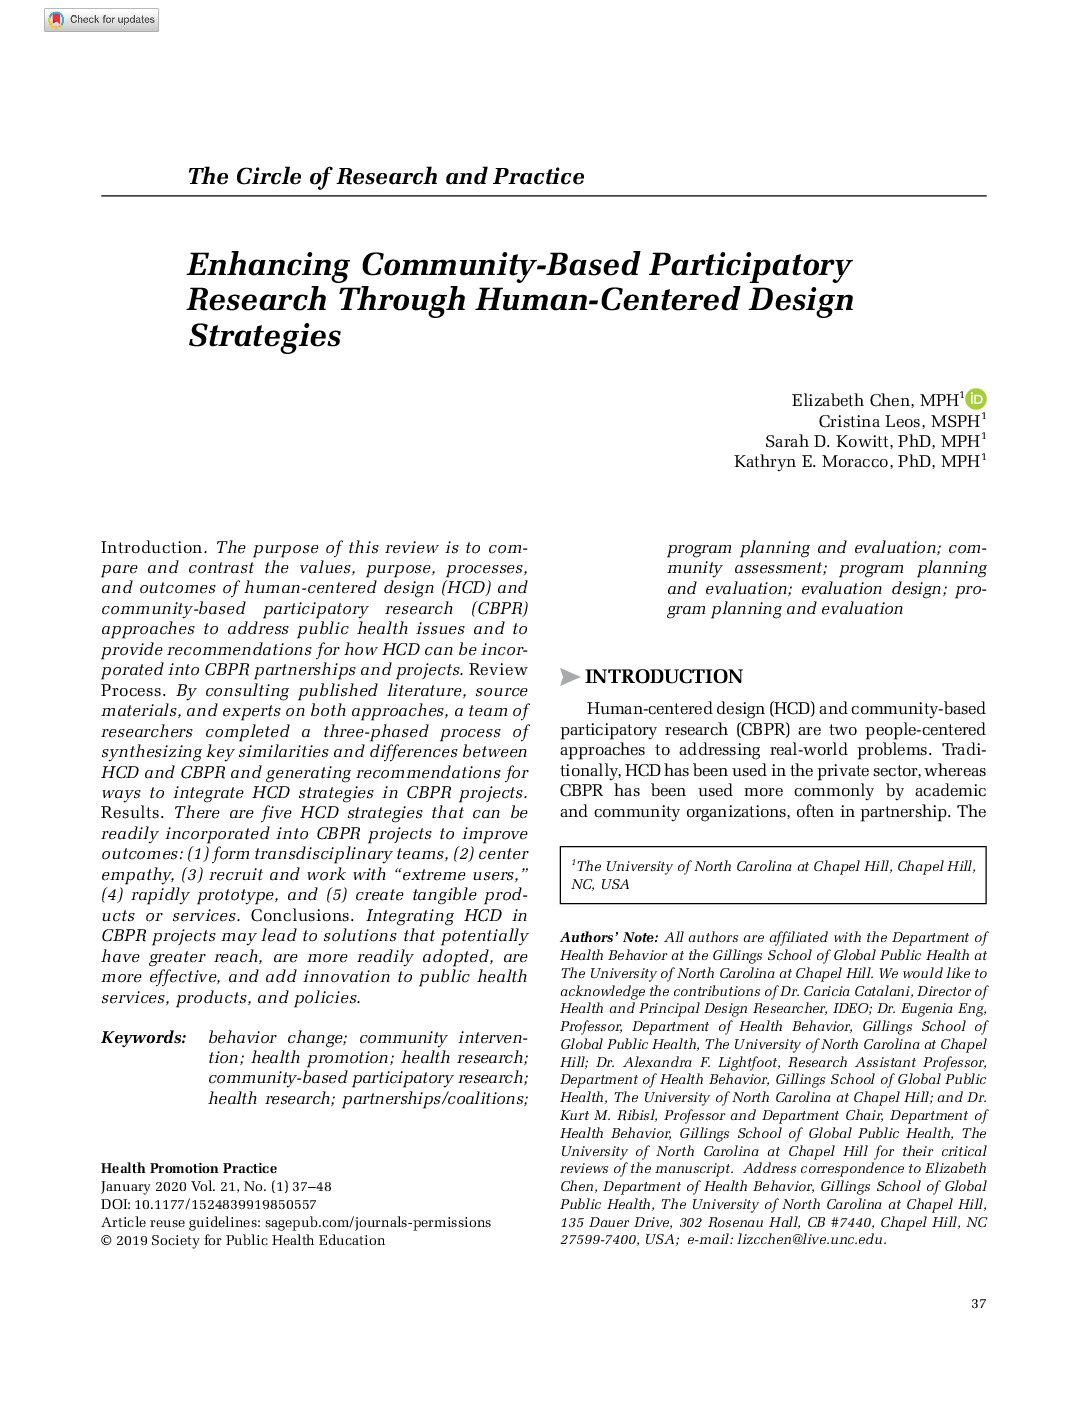 Enhancing Community-Based Participatory Research Through Human-Centered Design Strategies